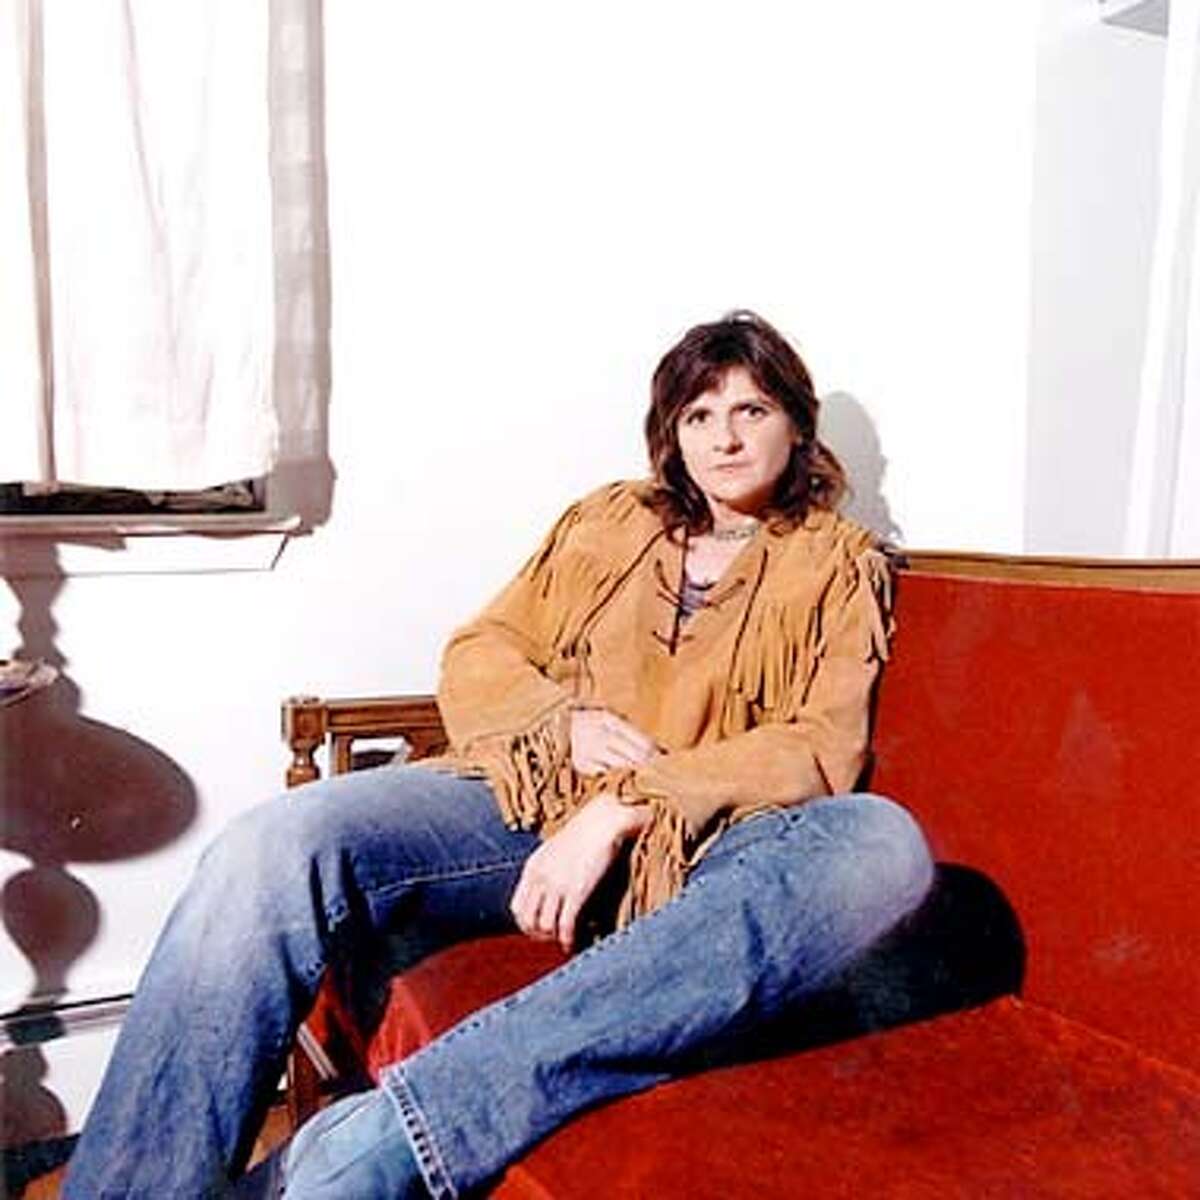 Out Of The Blue Indigo Girl Amy Ray Strikes Out On Her Own With Punk